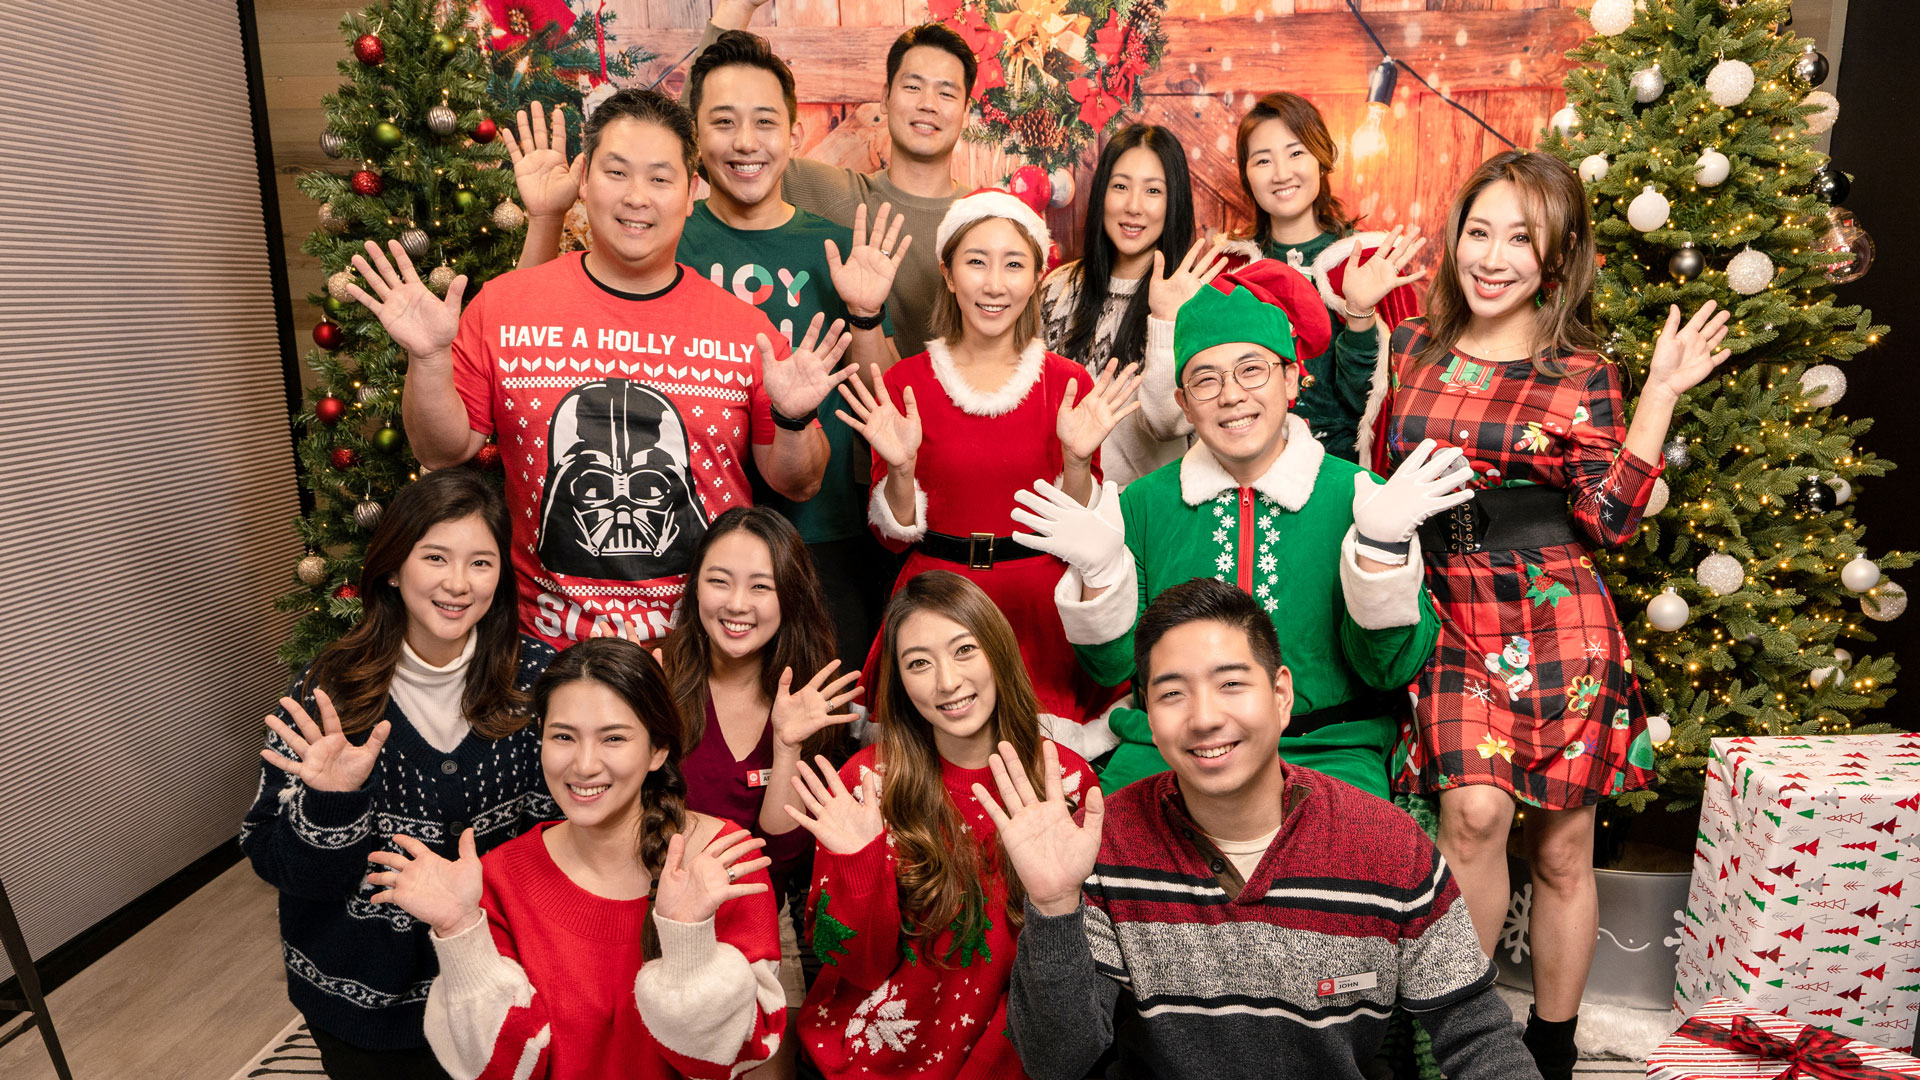 Welcome to JHT Group’s magical Photo with Santa event in 2022! 🎅🎄